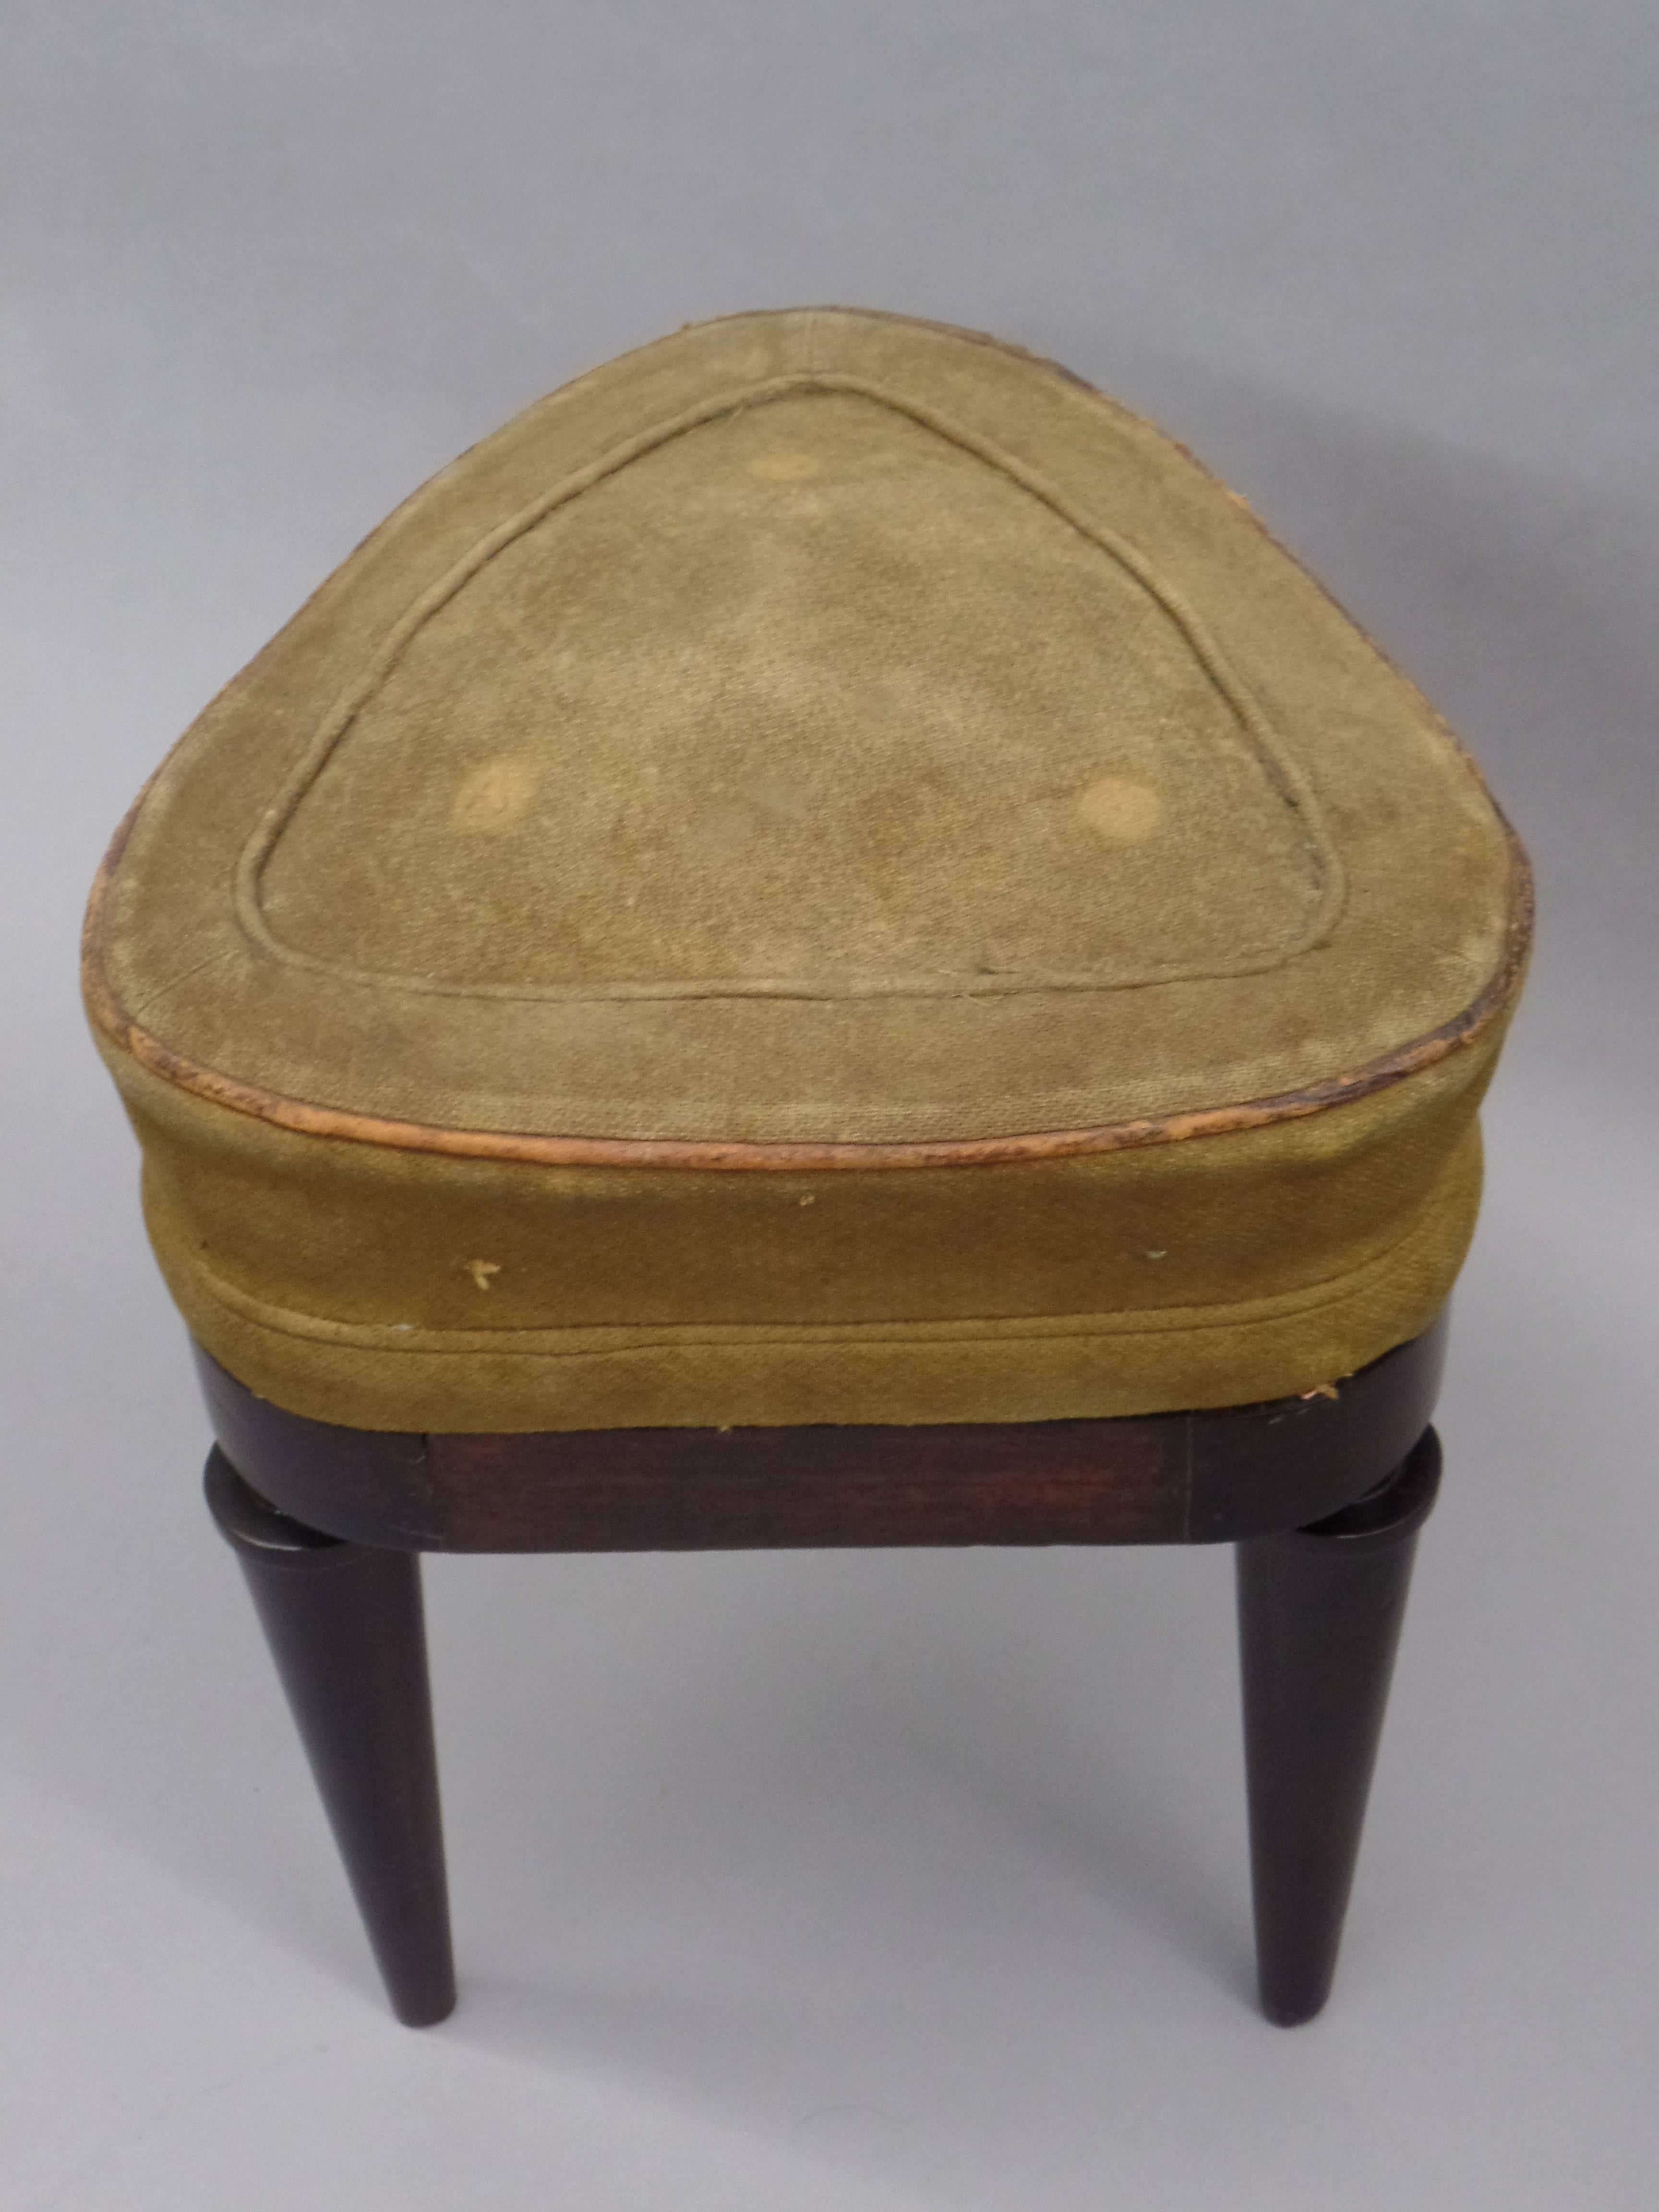 18th Century French Modern Neoclassical Mahogany and Suede Tri-Corner Stools, Andre Arbus For Sale